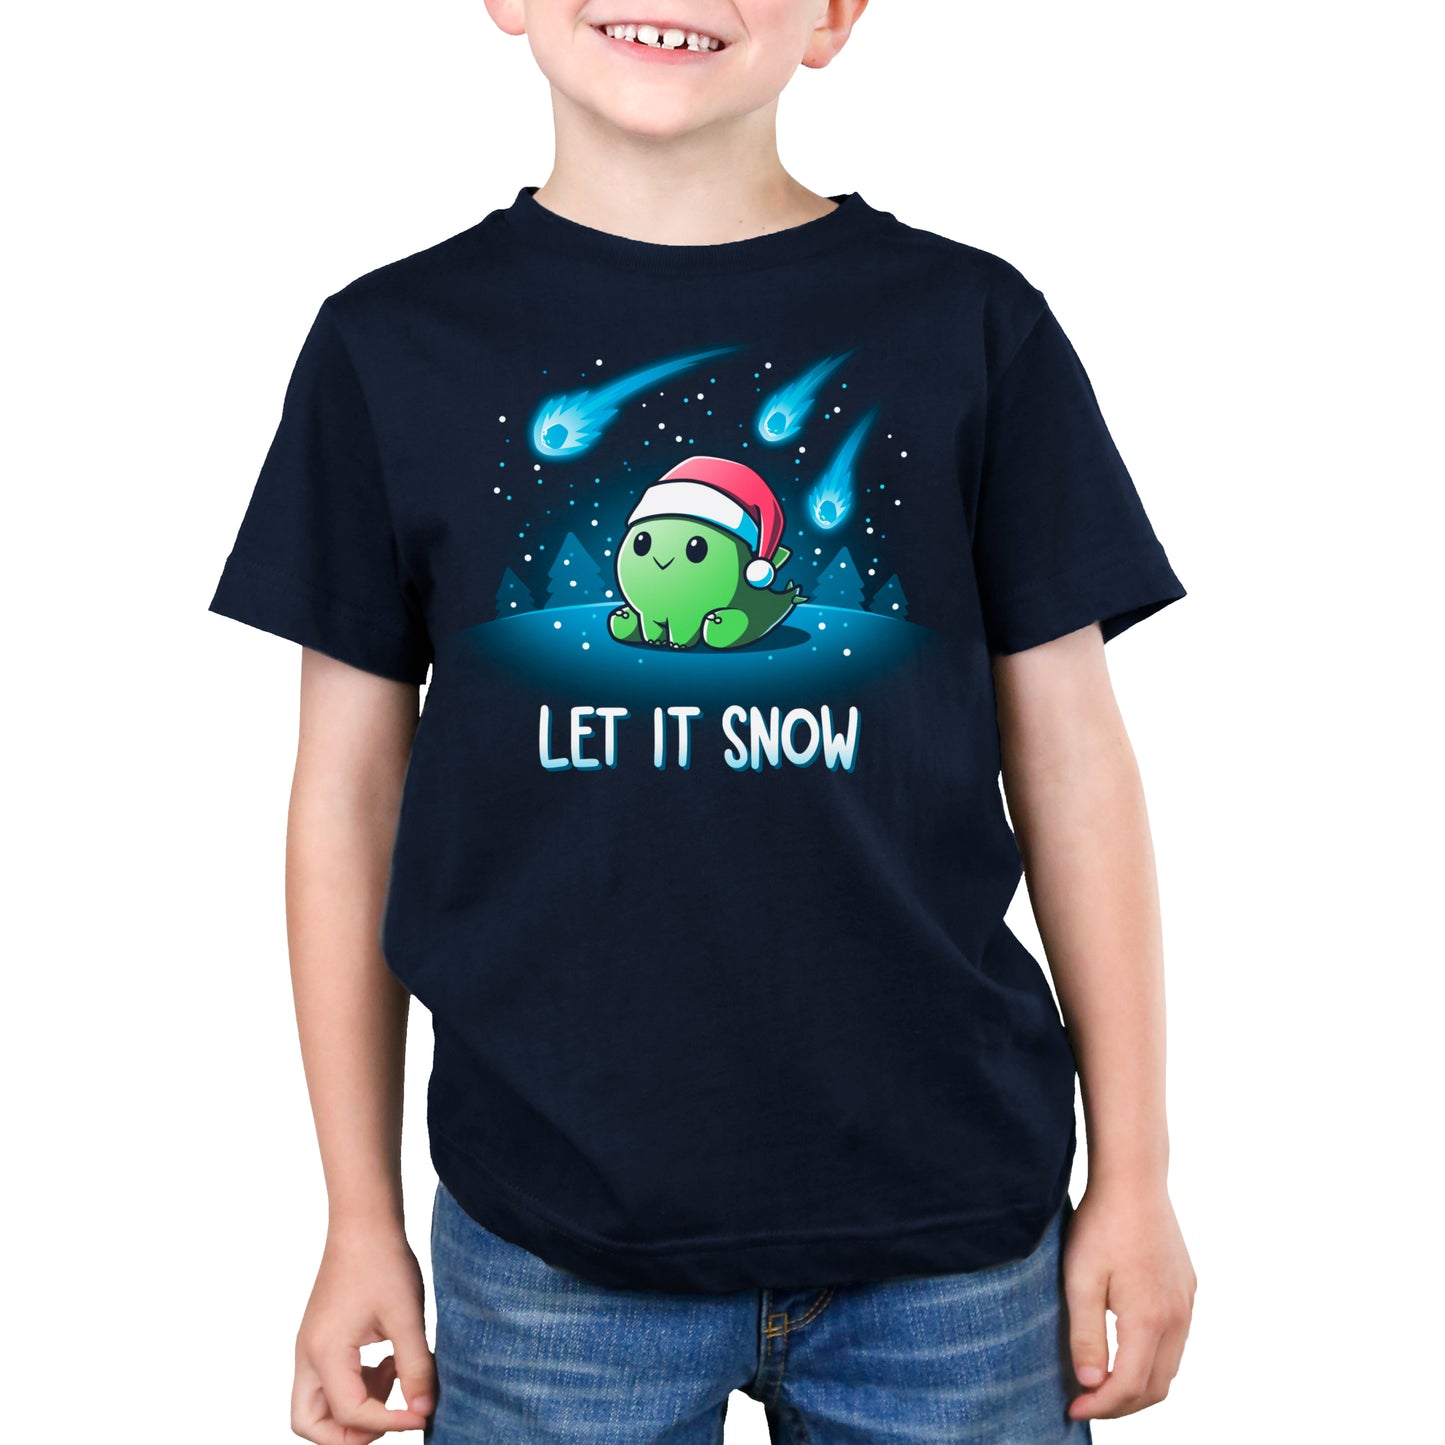 A boy wearing a navy blue t-shirt from TeeTurtle that says "Let It Snow.